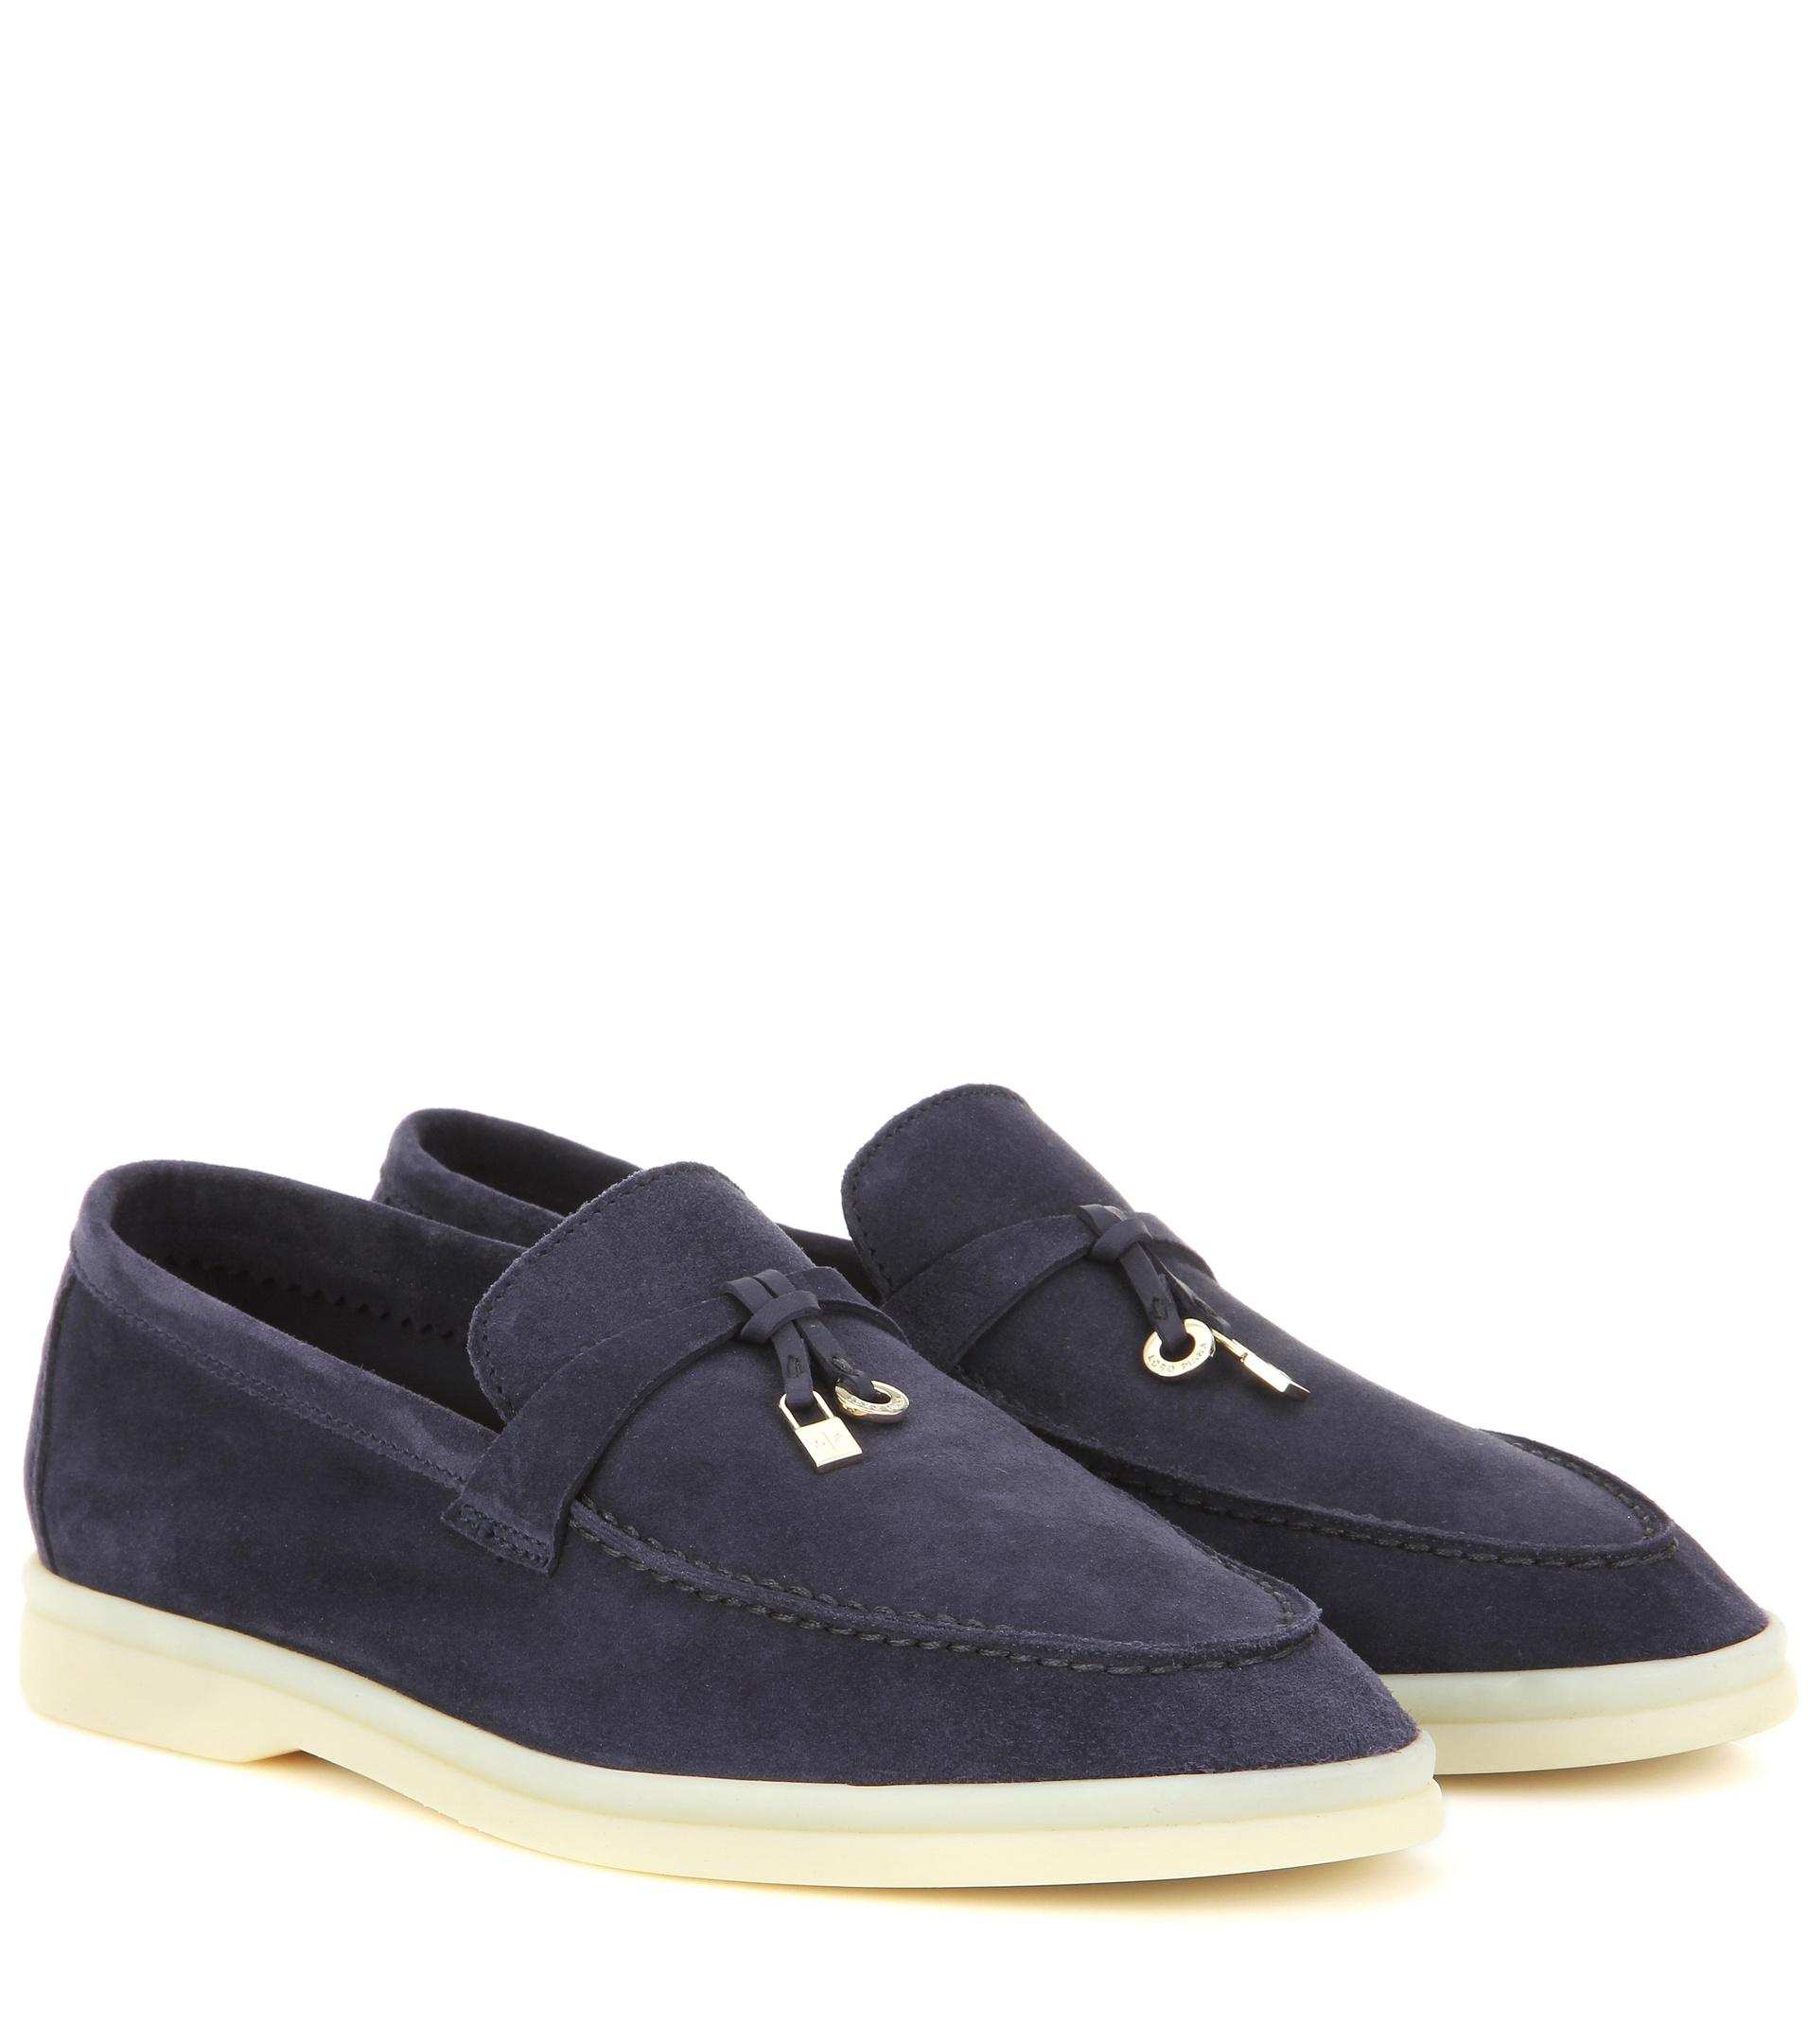 Lyst - Loro Piana Summer Charms Walk Embellished Suede Loafers in Blue